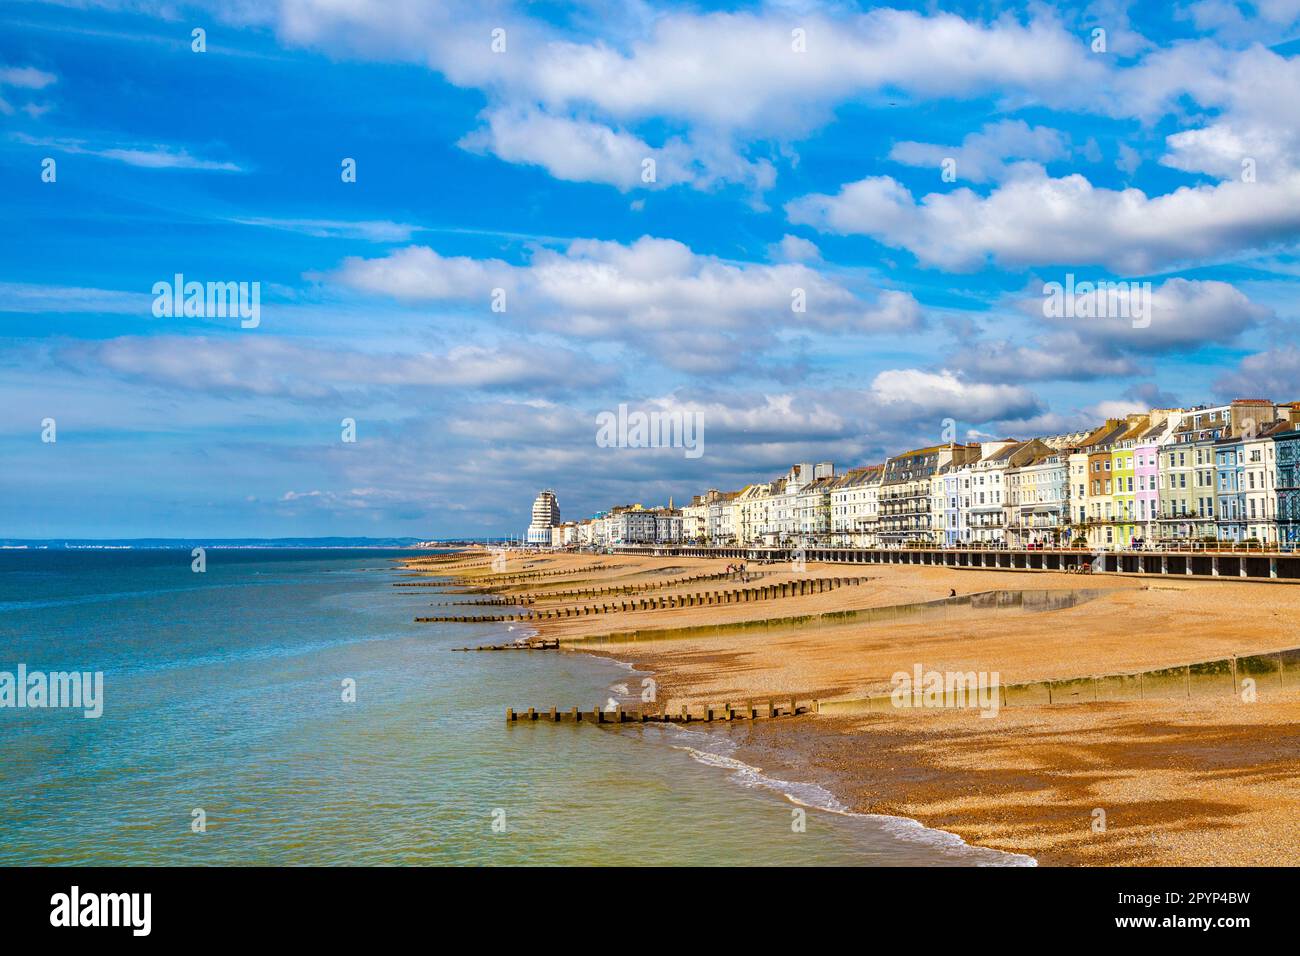 View of St. Leonards On Sea Beach from Hasings Pier, Hastings, East Sussex, UK Stock Photo